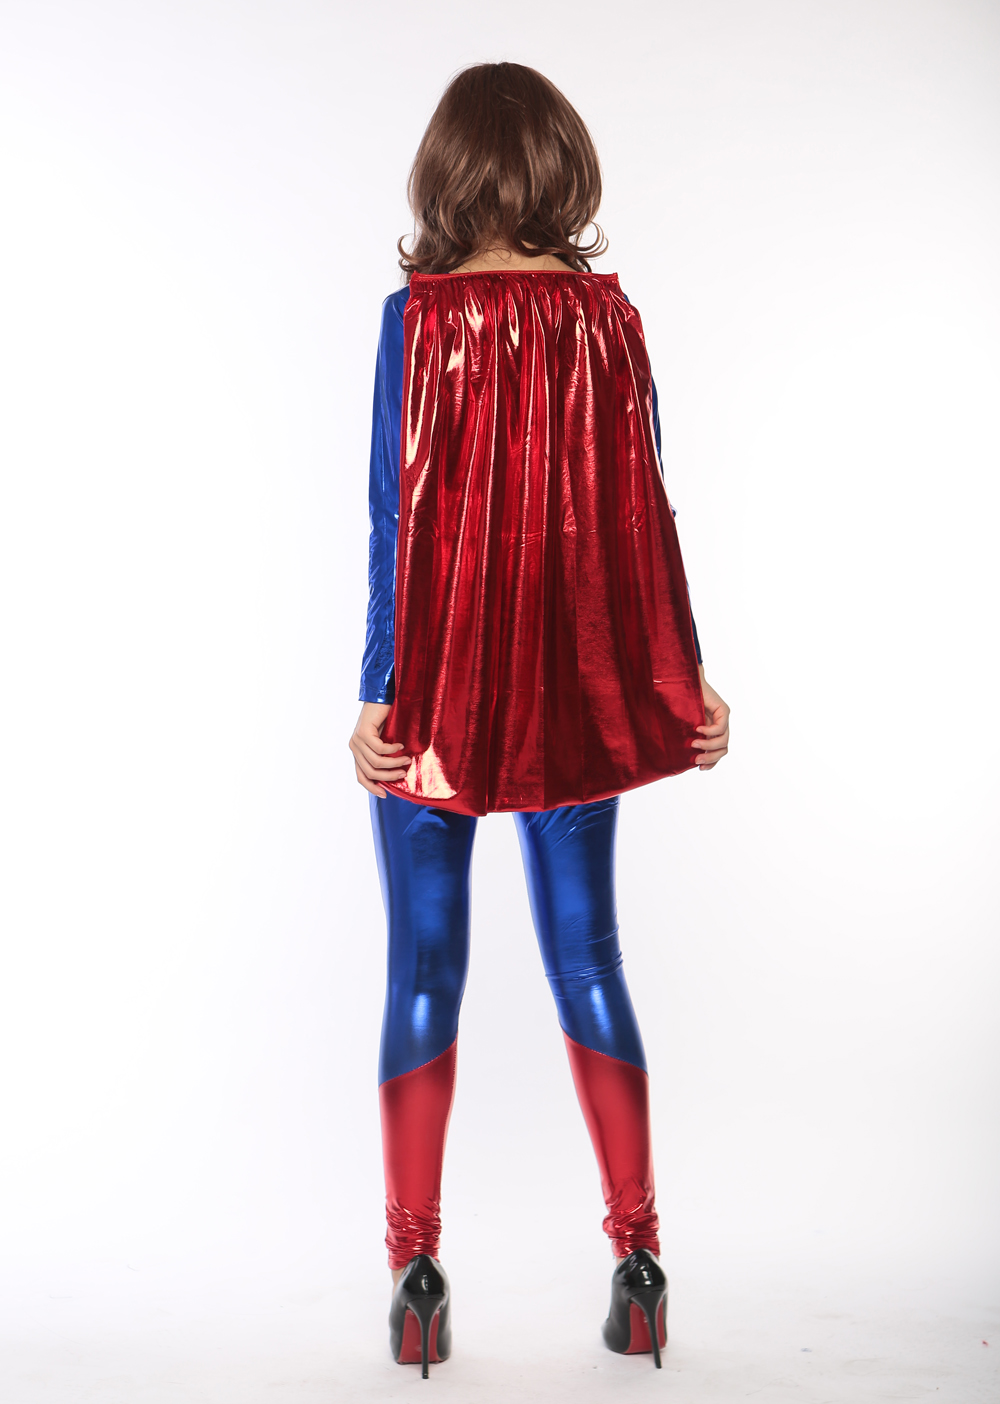 F1734 cosplay supergirl  catsuit costume,it comes with bodysuit with cape